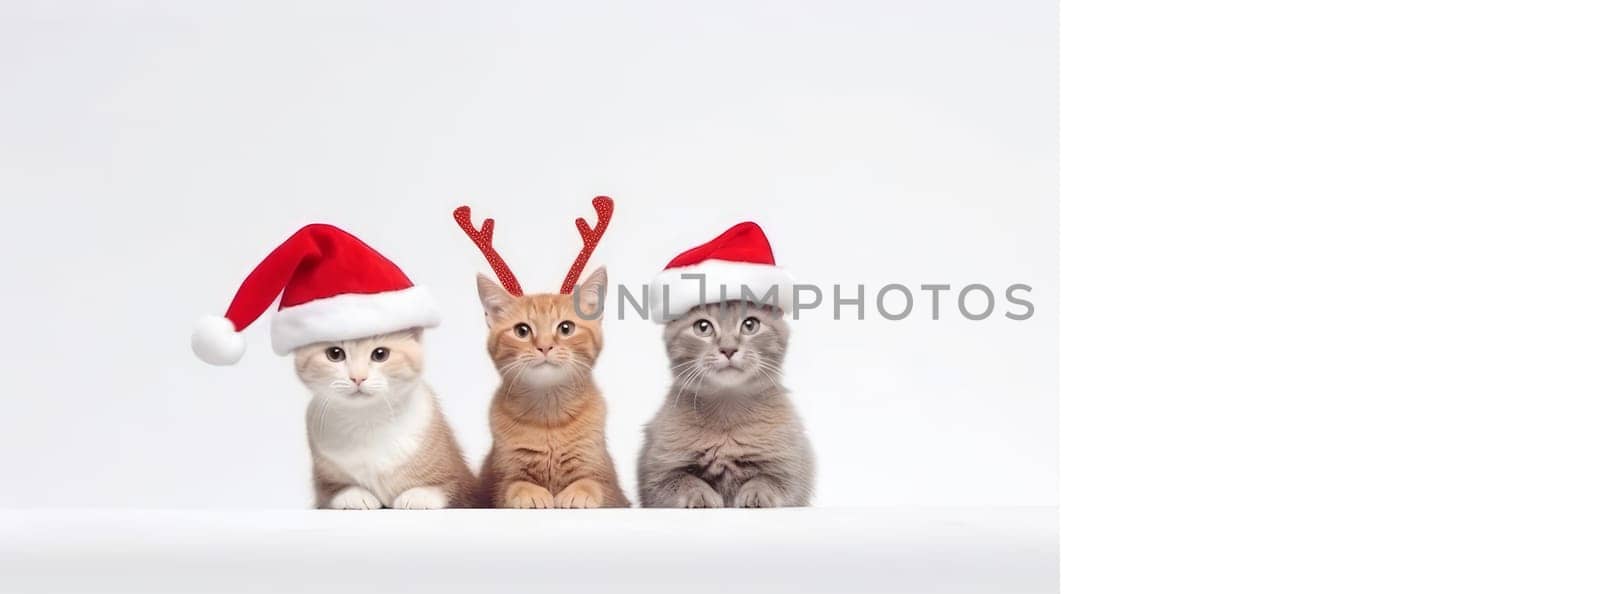 Cats and kittens celebrating the Christmas holidays in a red santa claus hat, reindeer antlers and a red gift ribbon on a white background. AI generated. by Alla_Yurtayeva